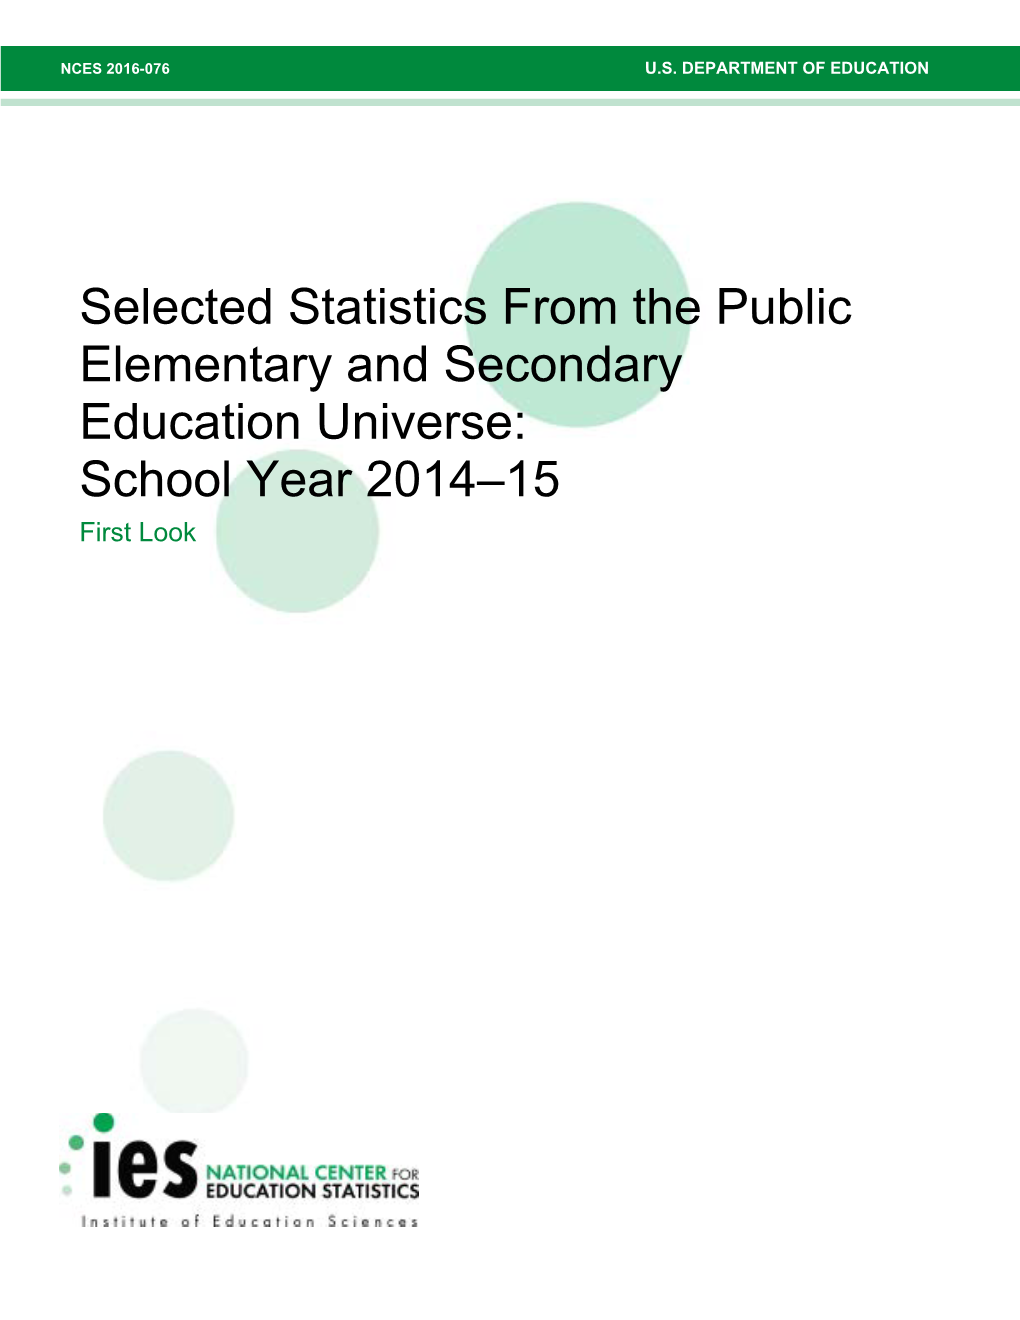 Selected Statistics from the Public Elementary and Secondary Education Universe: School Year 2014–15 First Look